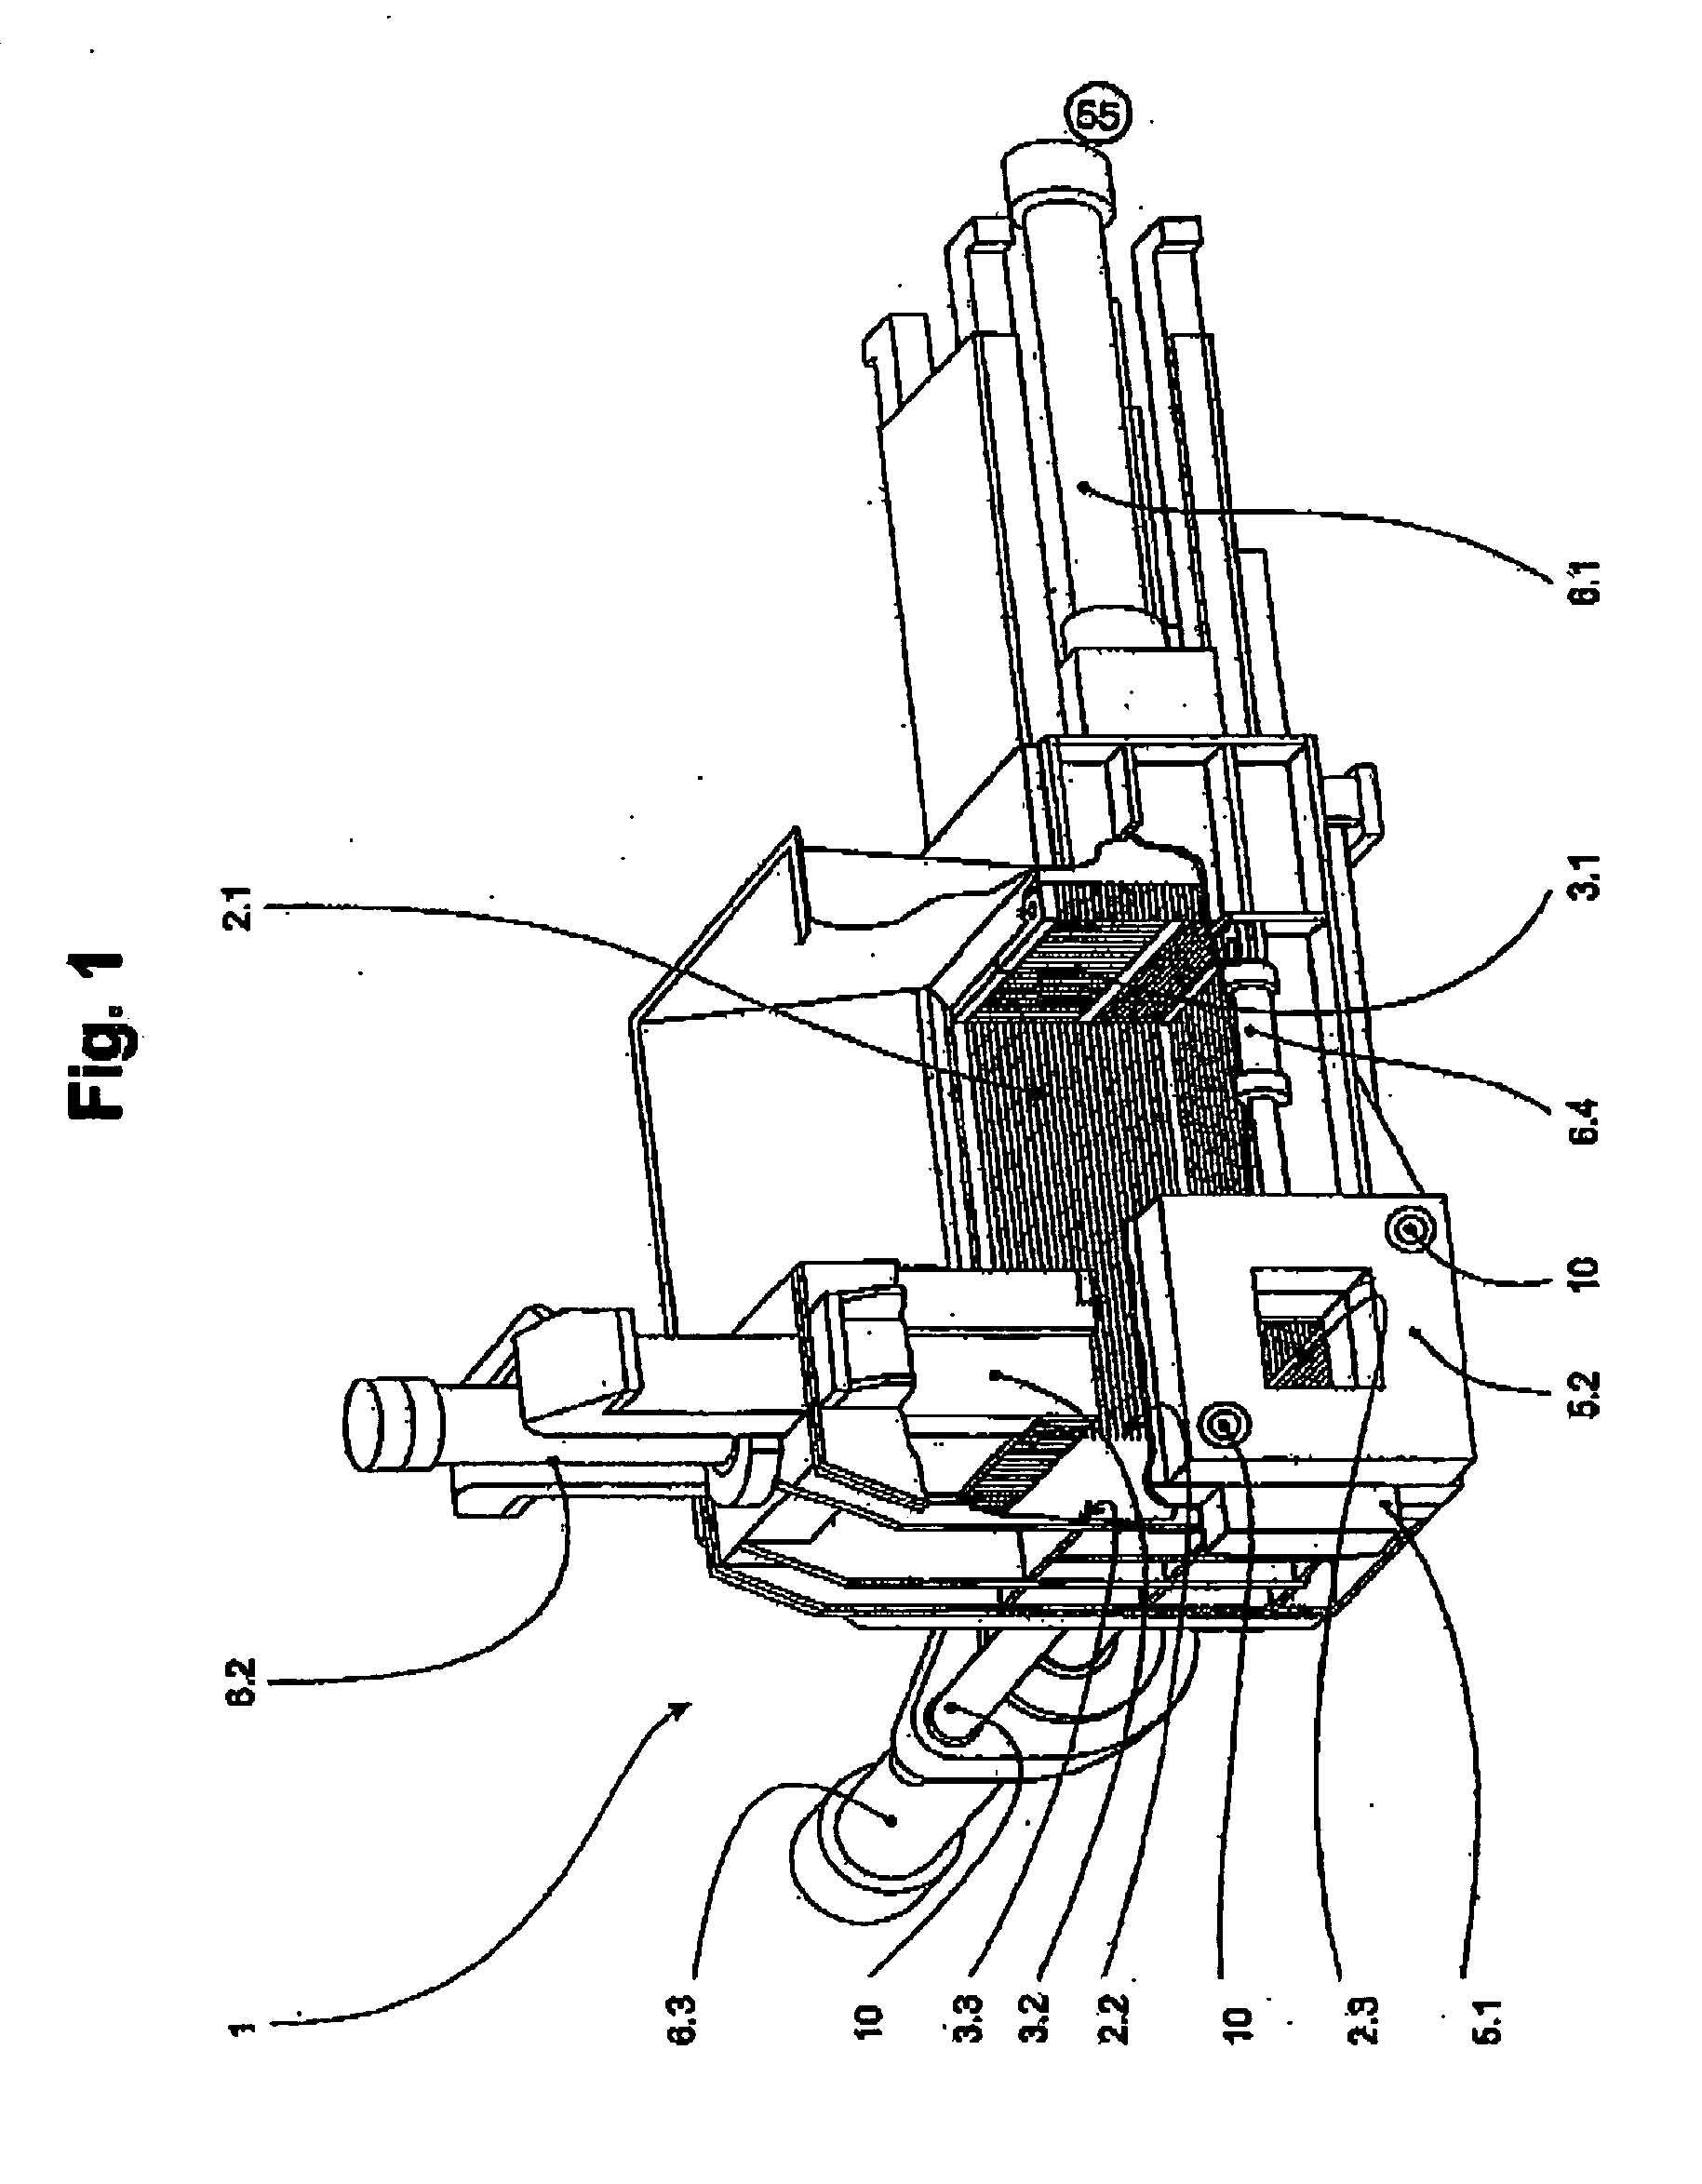 Method and arrangement for monitoring the operating condition of presses, particularly packing presses